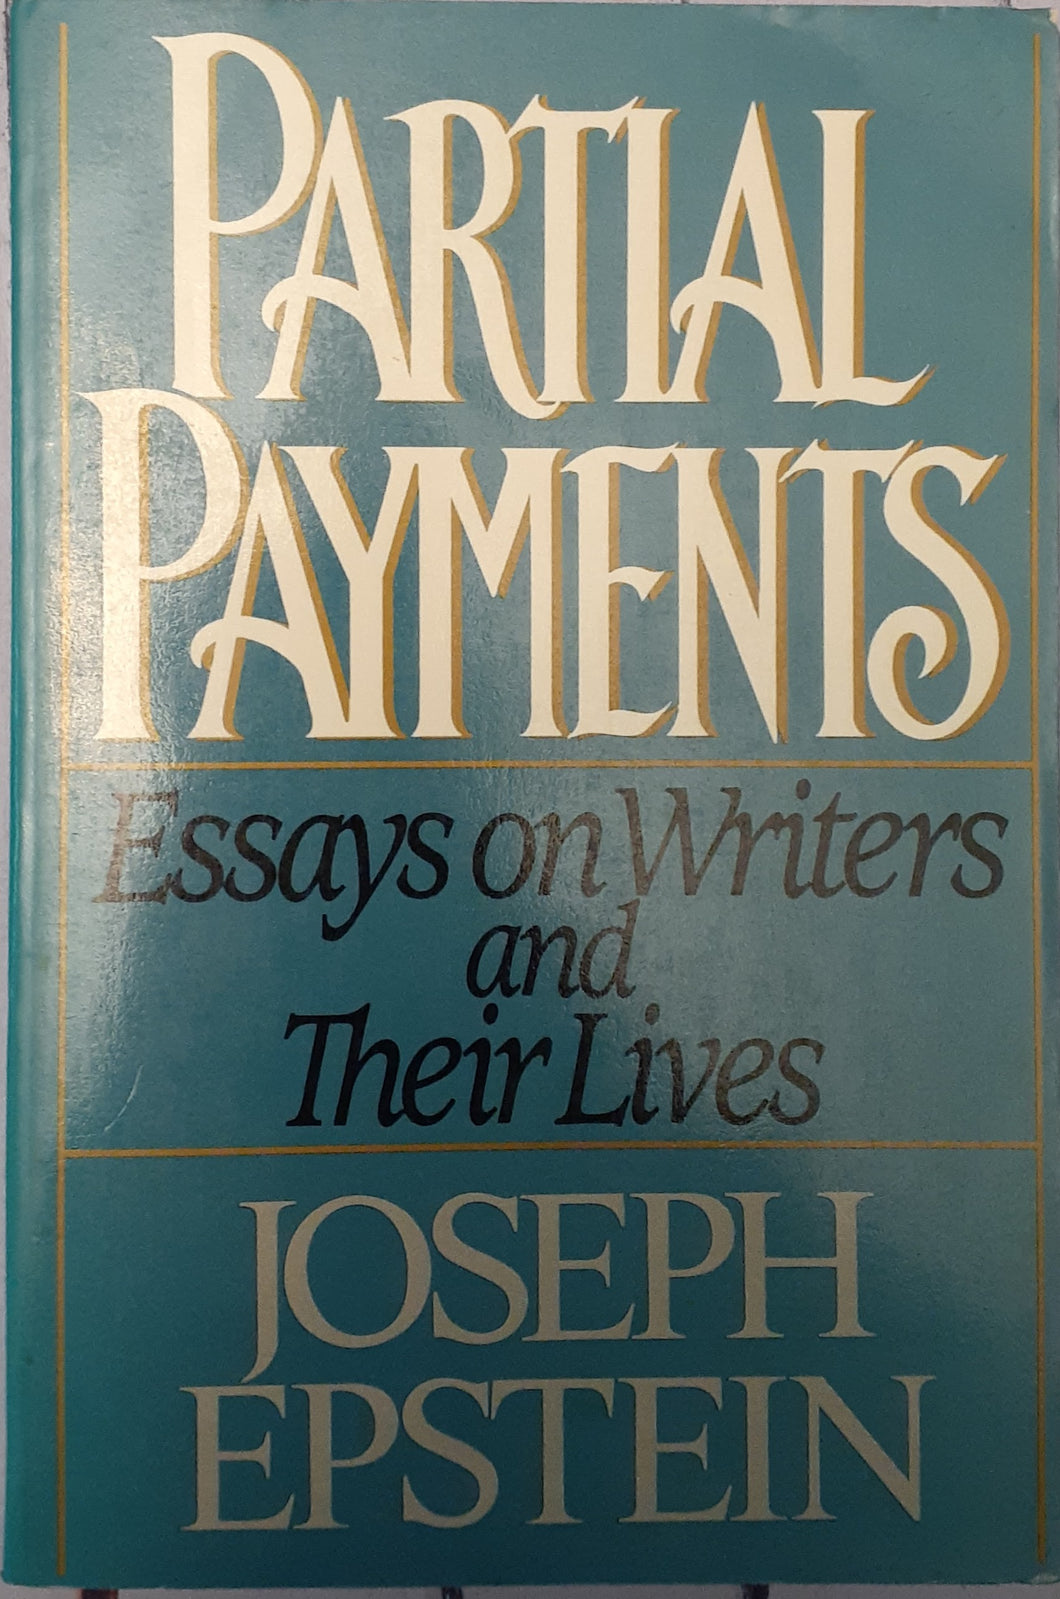 Partial Payments - Essays on Writers and Their Lives